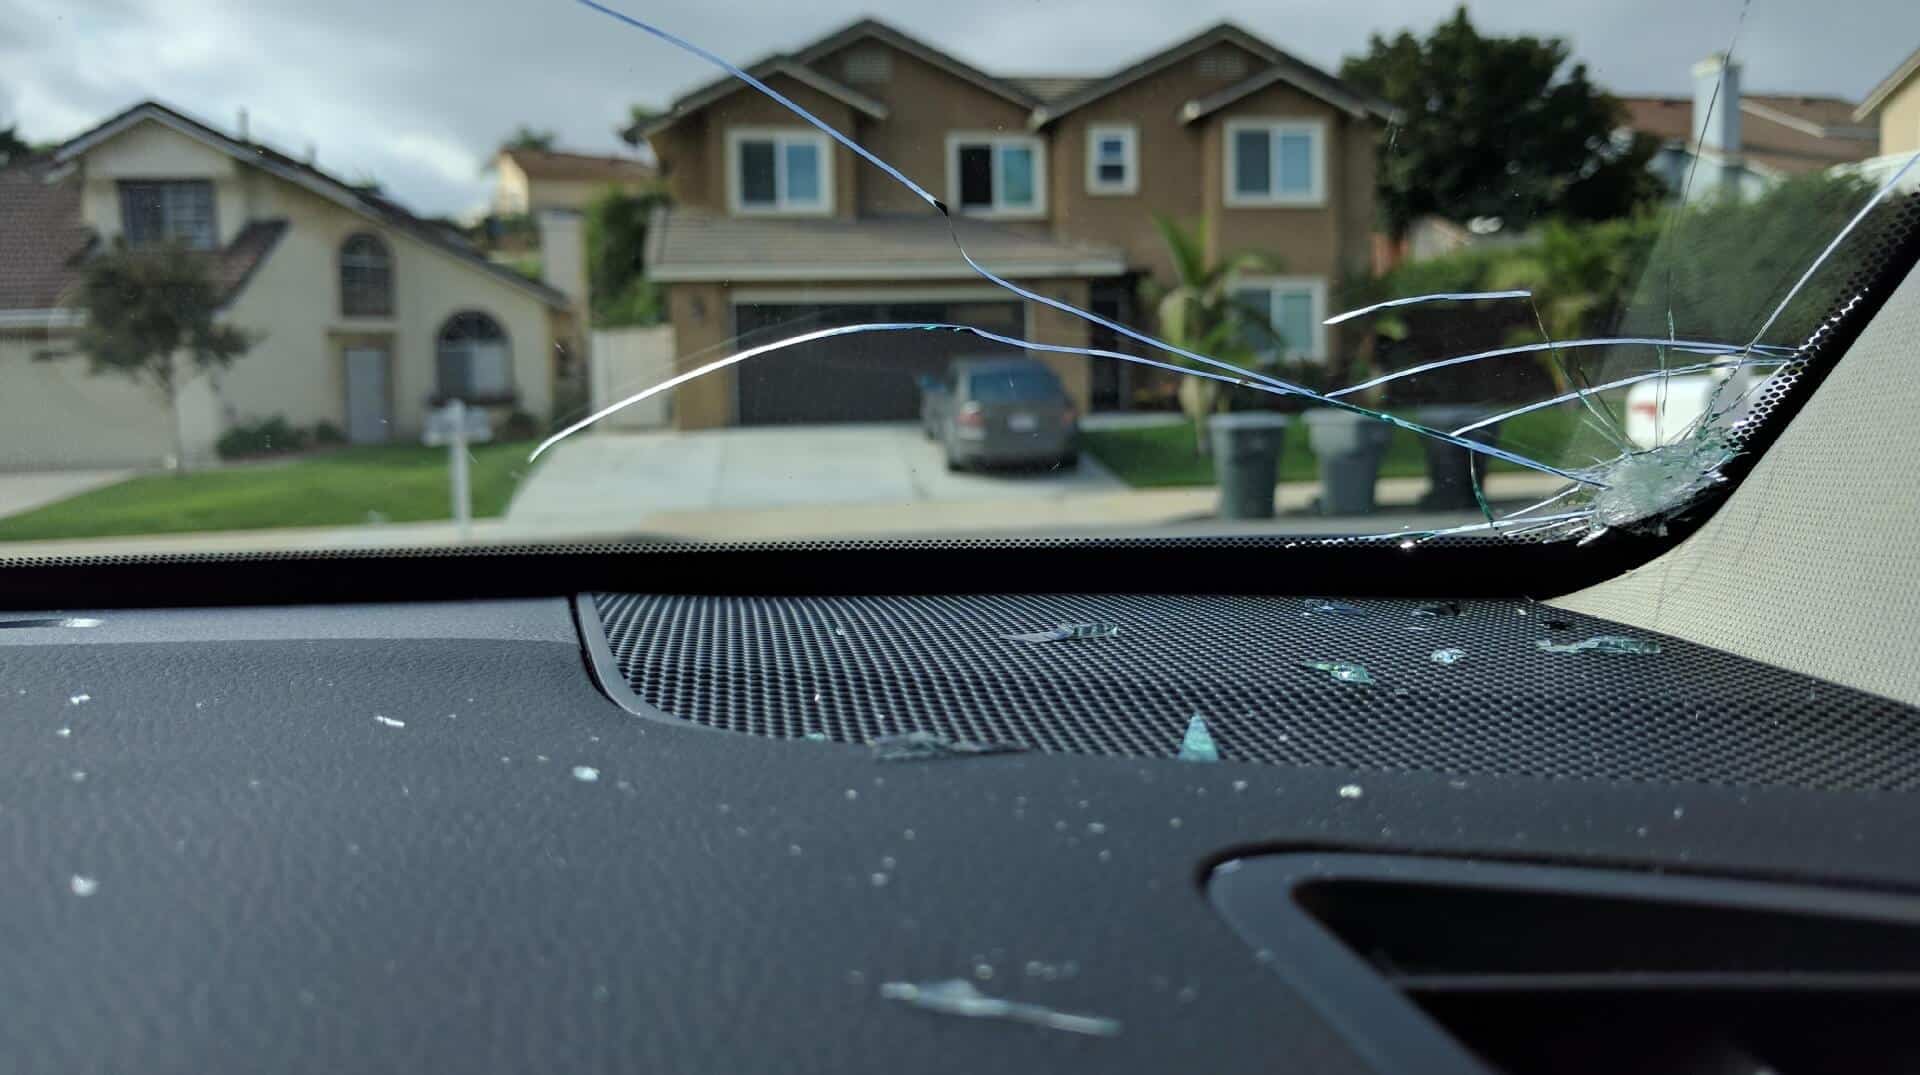 WHEN SHOULD A CRACKED WINDSHIELD BE REPLACED?